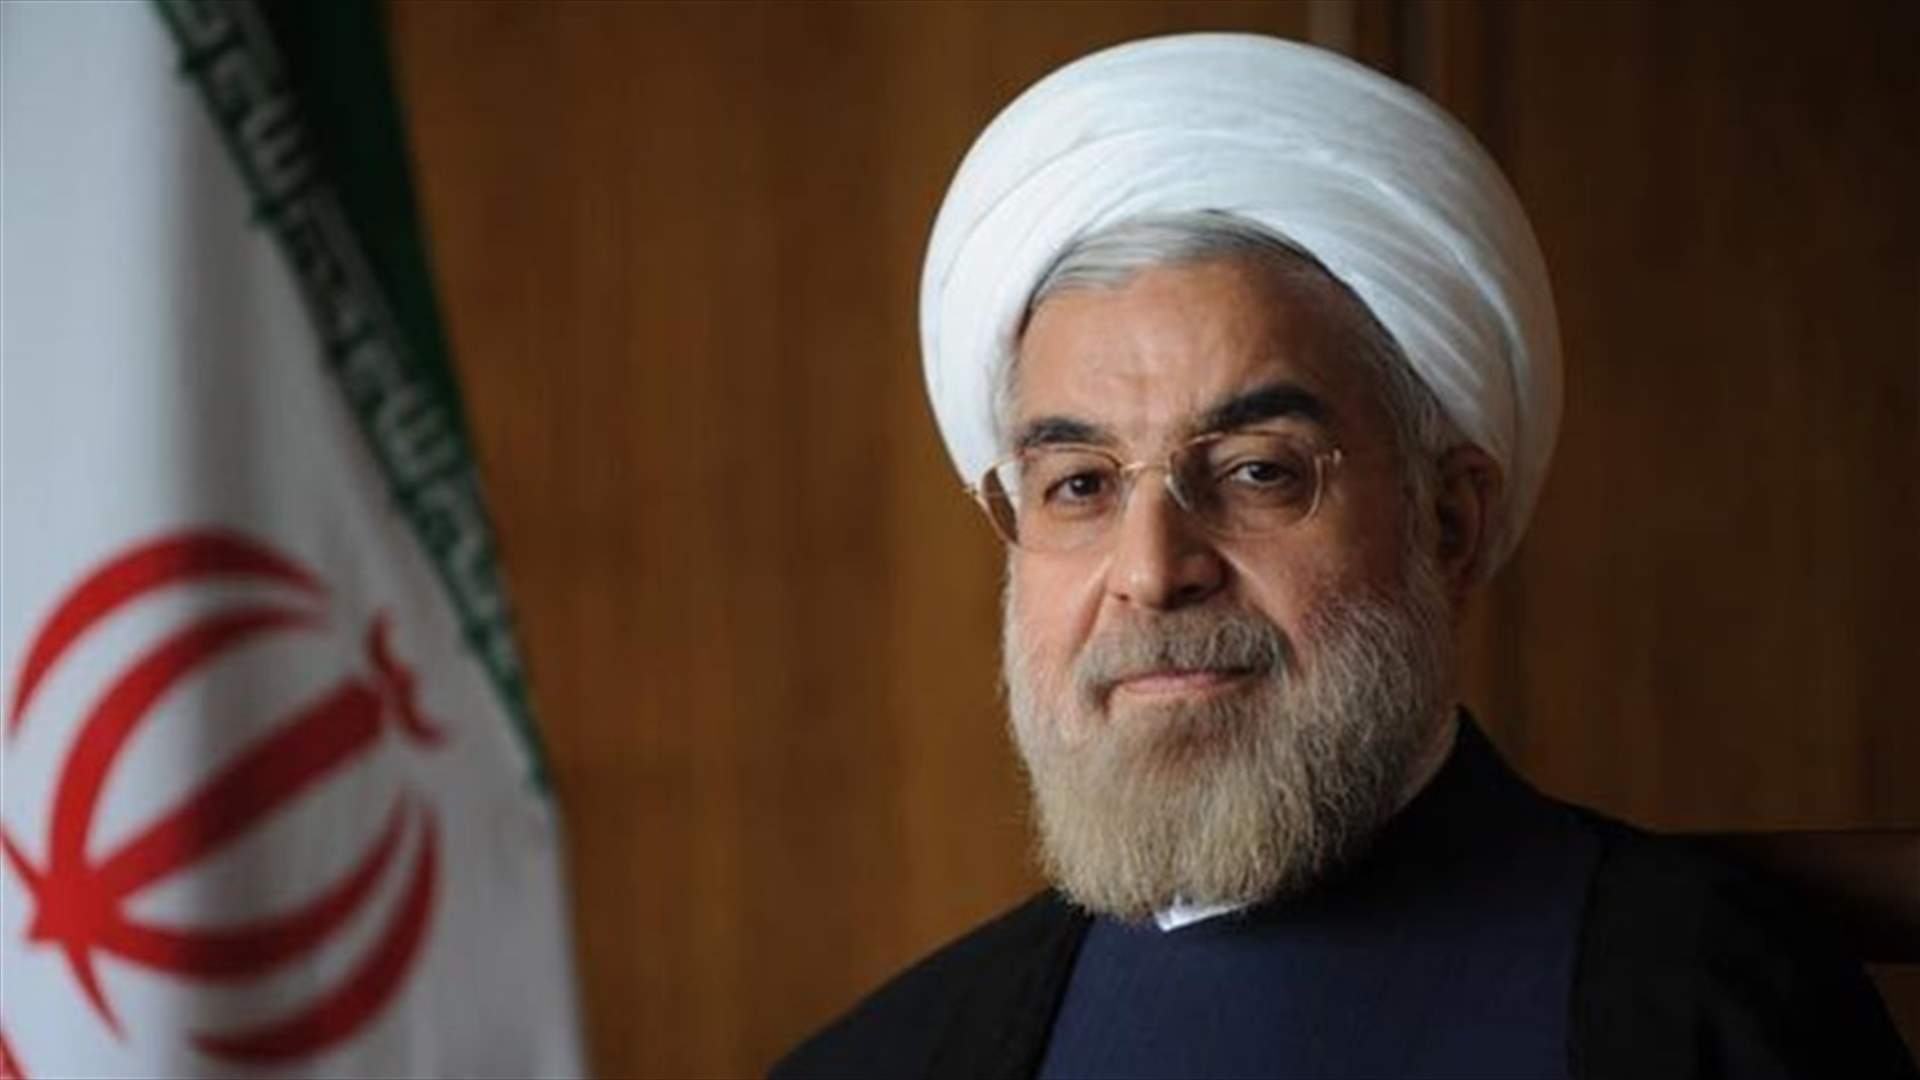 Sanctions lifted, Iran&#39;s Rouhani heads to Europe to drum up business